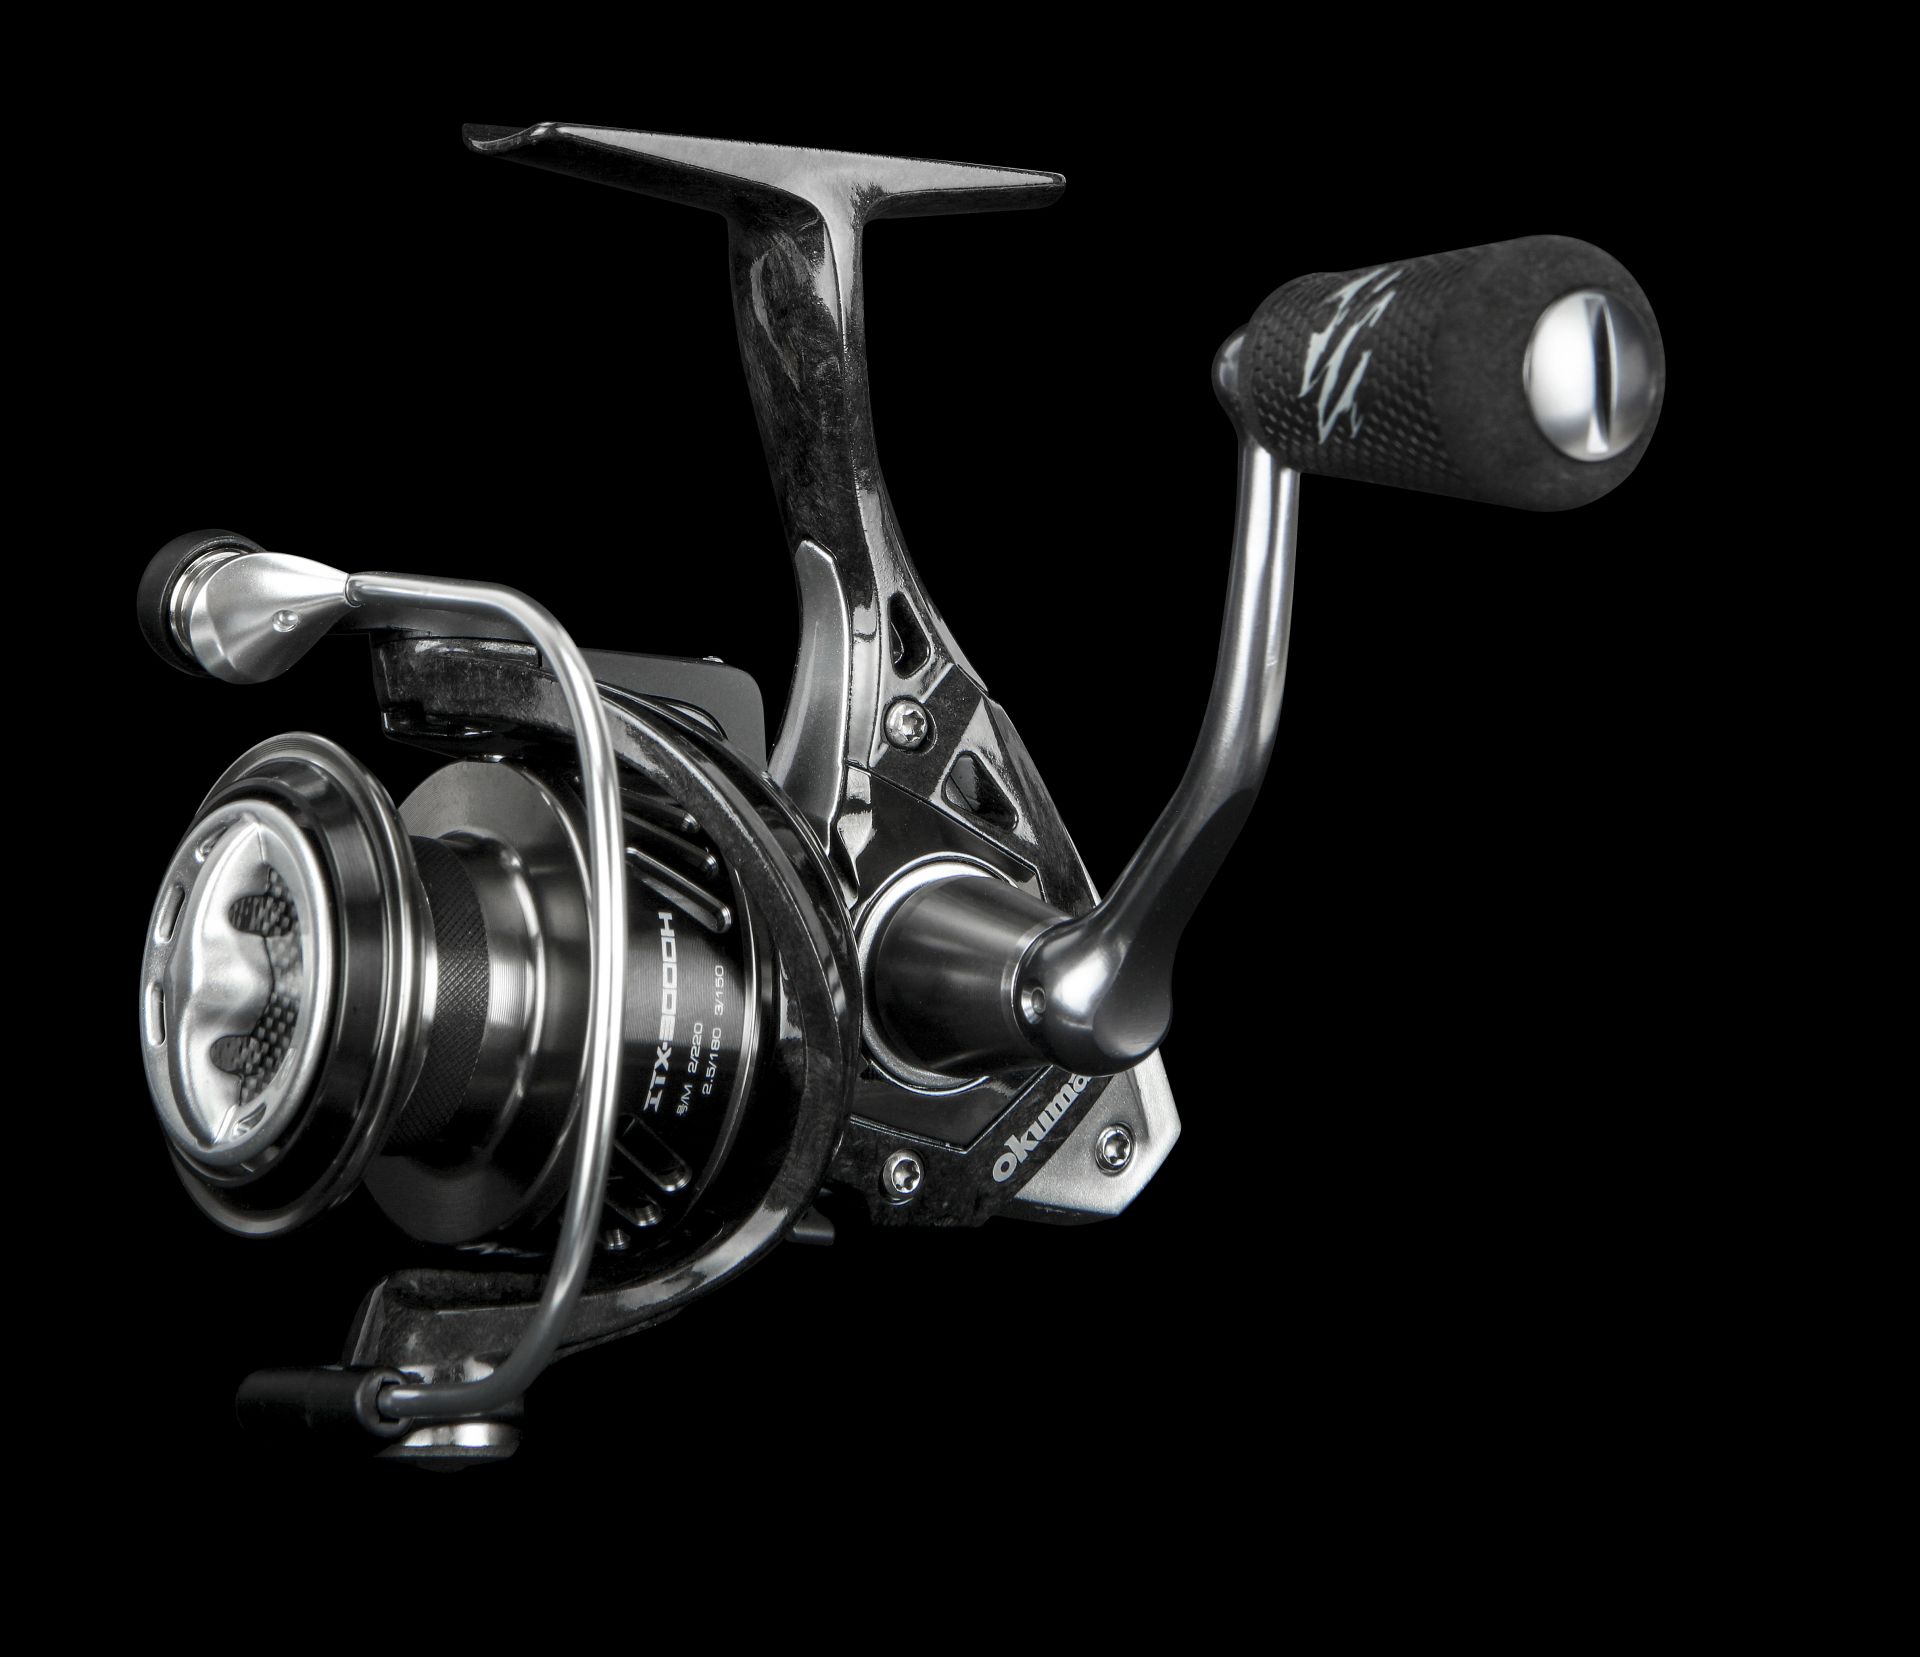 Okuma Fishing Tackle USA on X: The ne Okuma ITX Crossover reels are  perfect for everything from ice with the compact 1,000 size reel up to your  light inshore fishing with the